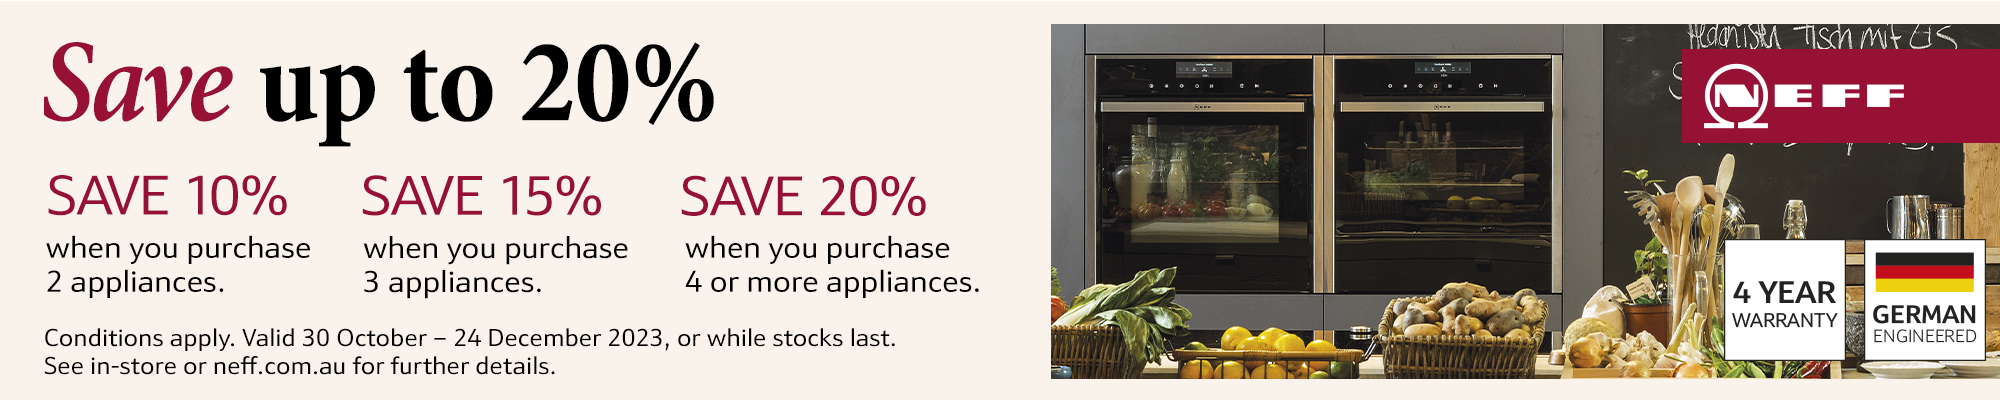 Save $200 On NEFF Pyrolytic Built-In Oven